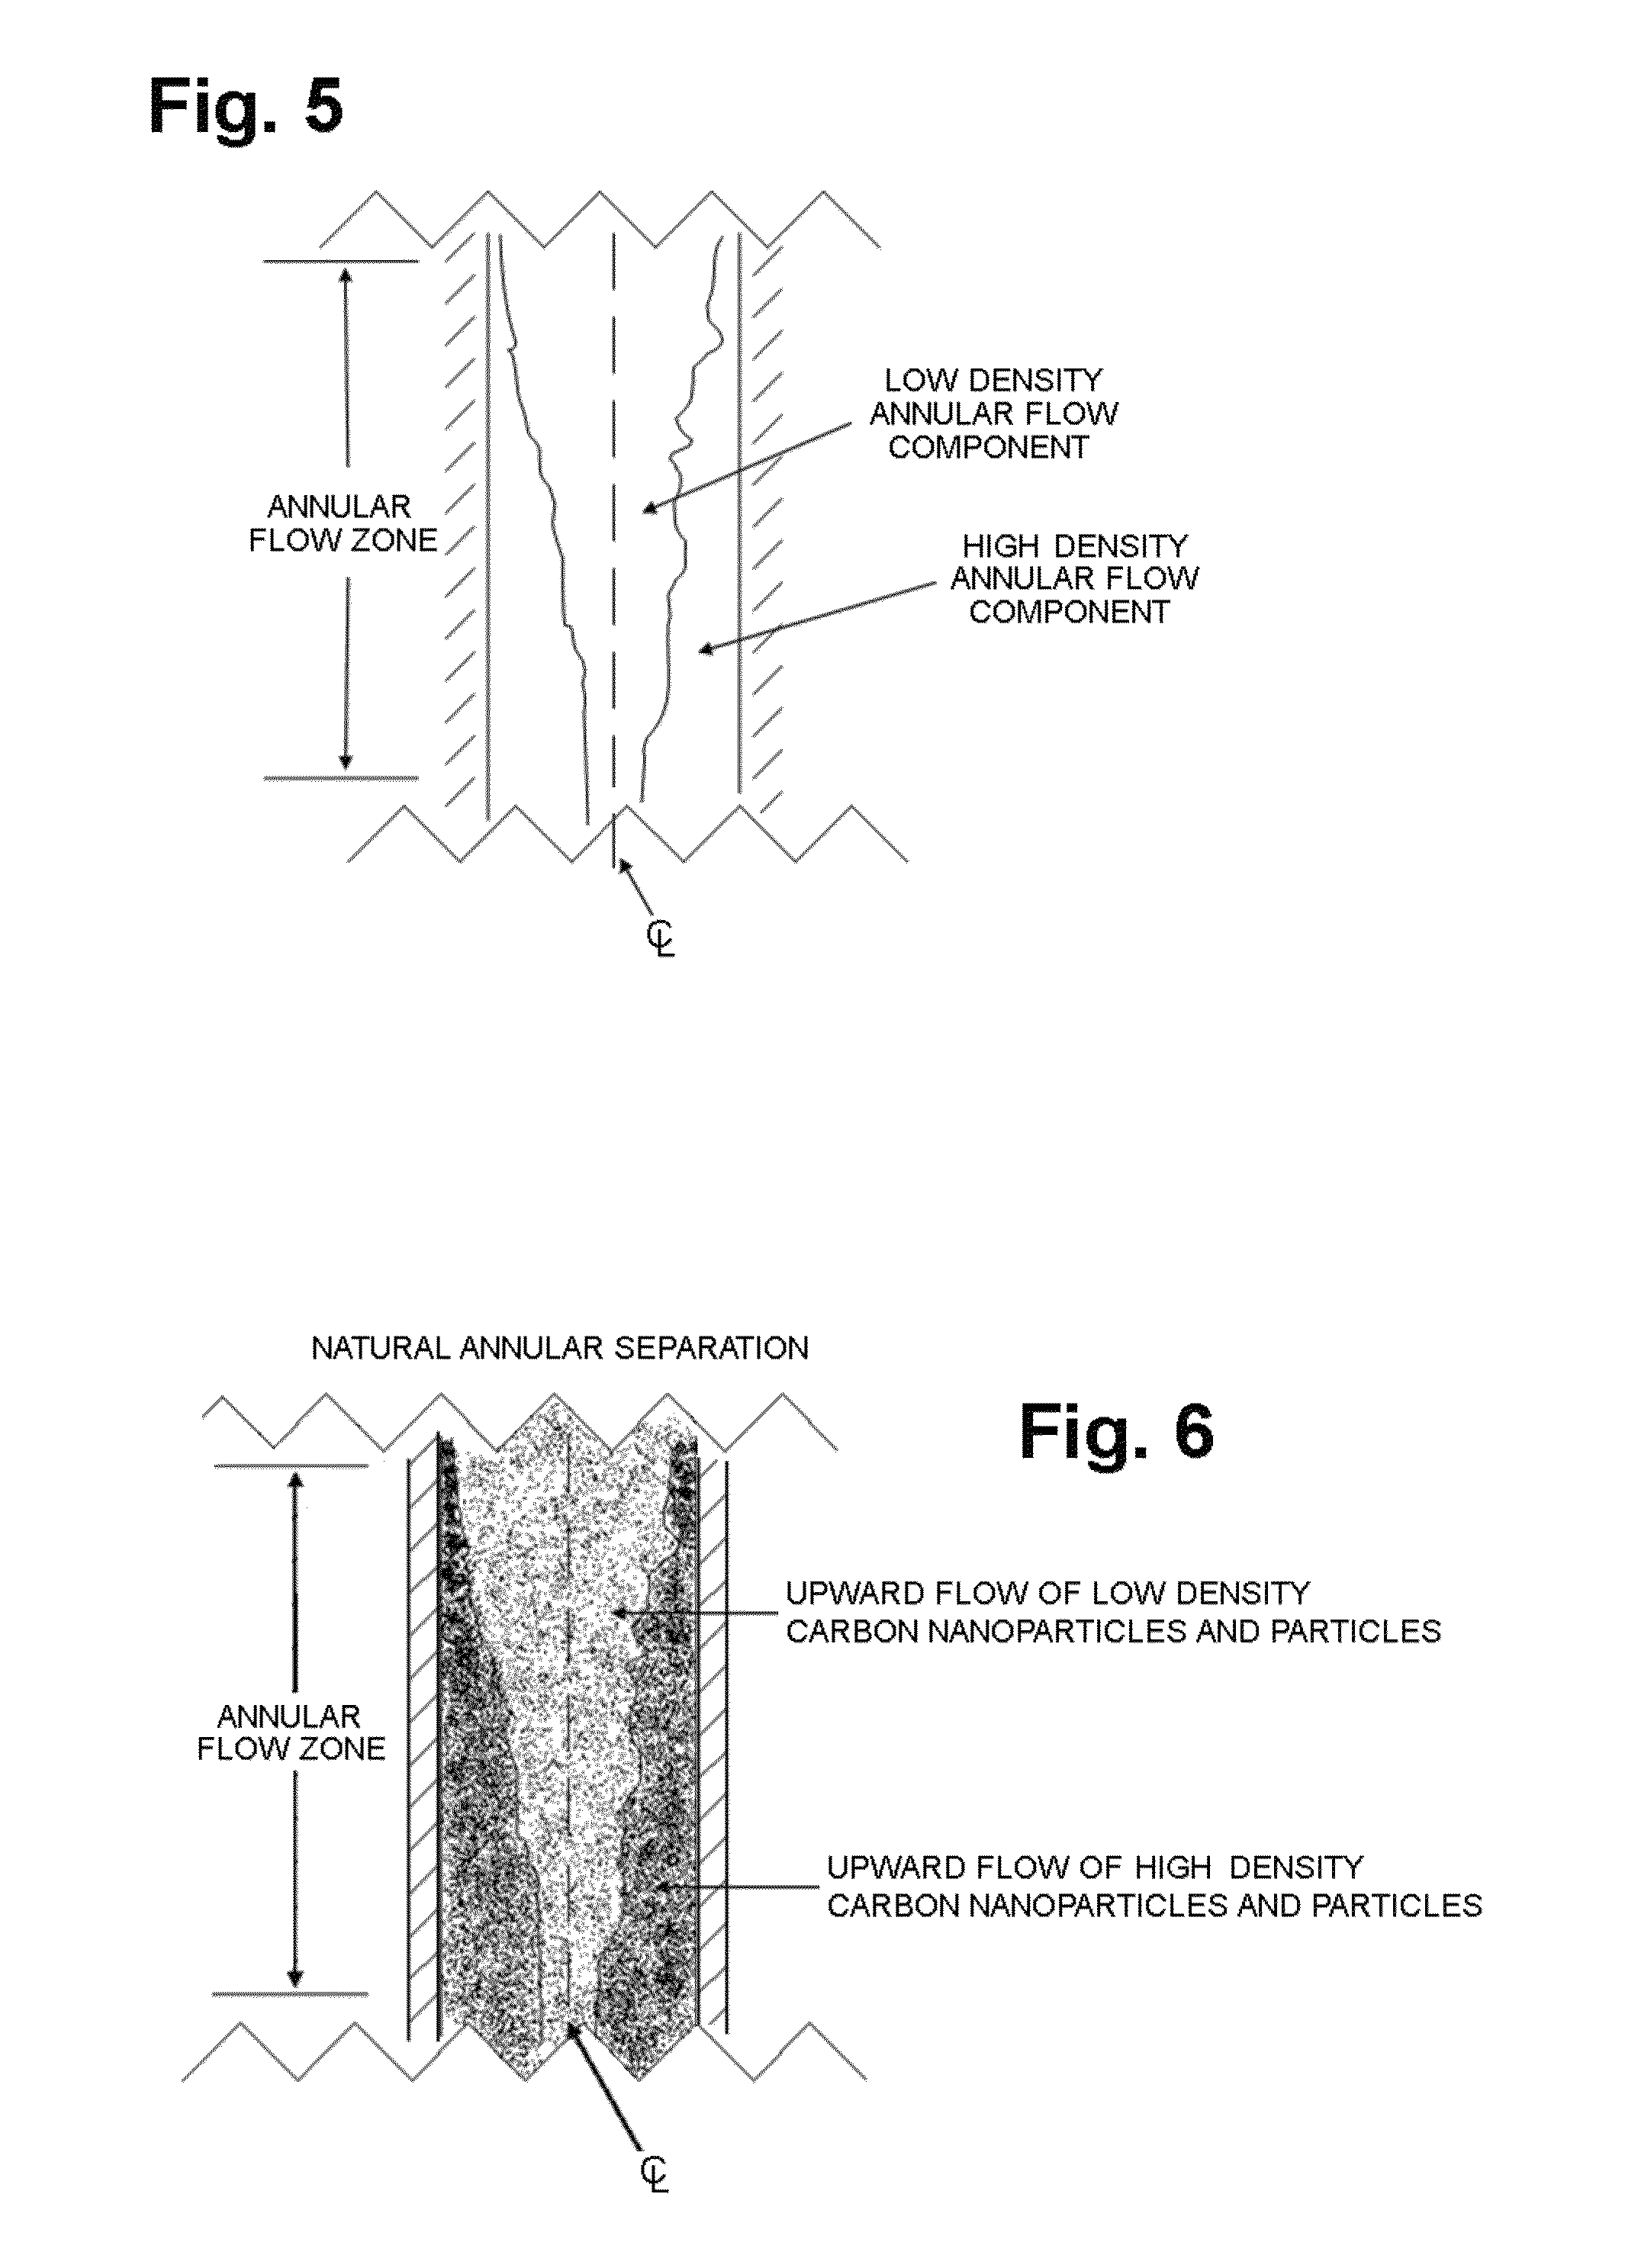 Process for the production of carbon nanoparticles and sequestration of carbon